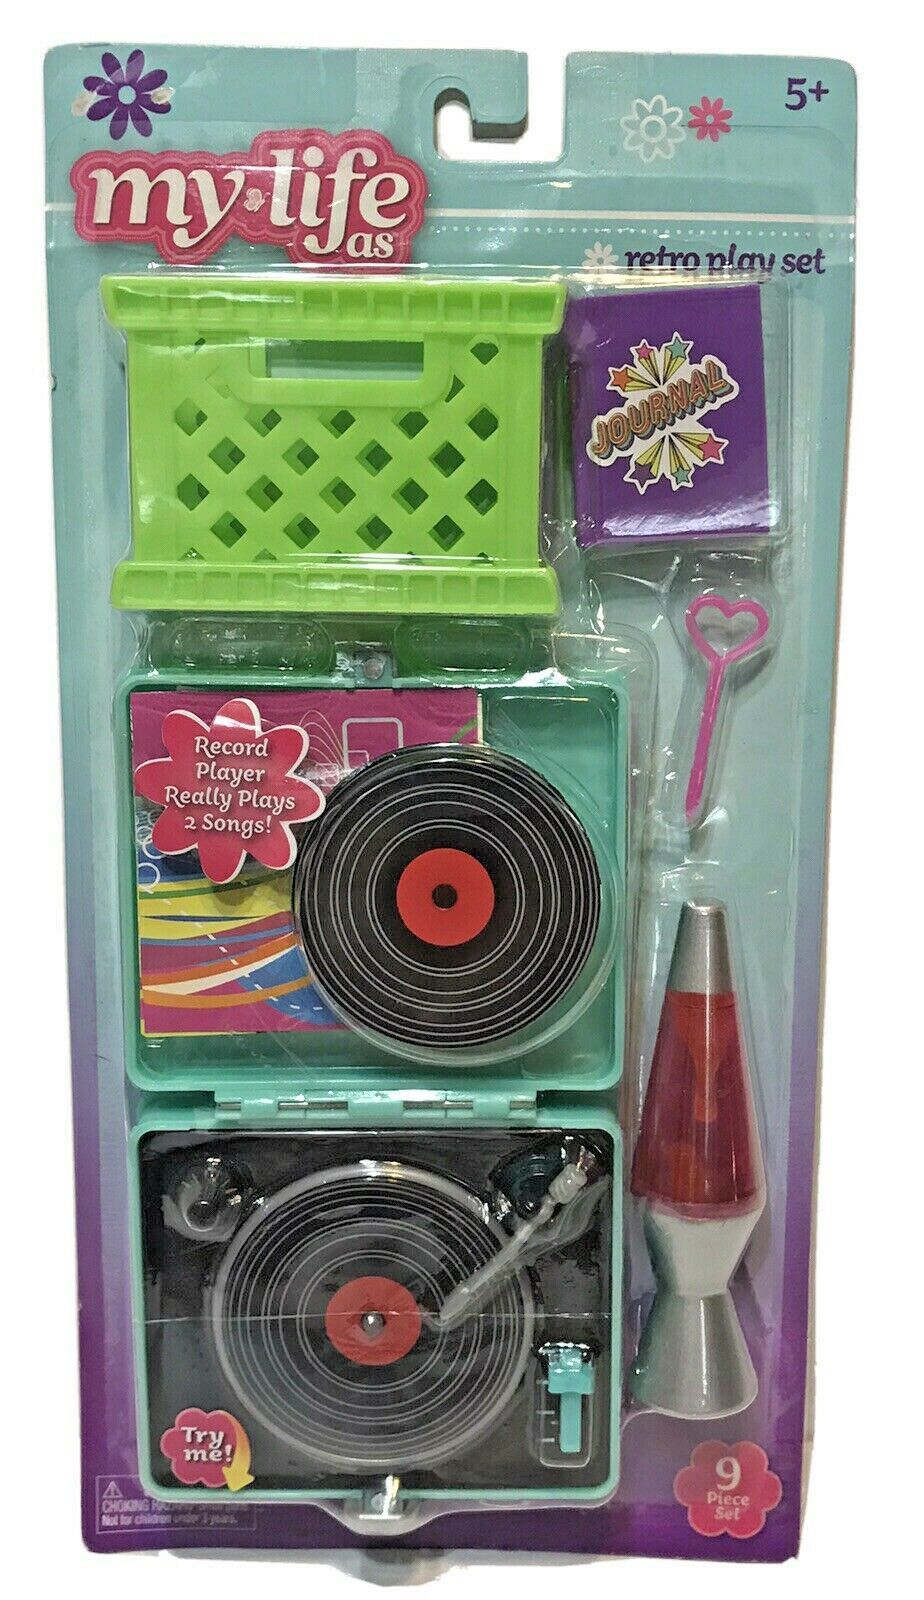 My Life As 9 Piece Retro Play Set Record Player Music American Girl Toy New - $14.58